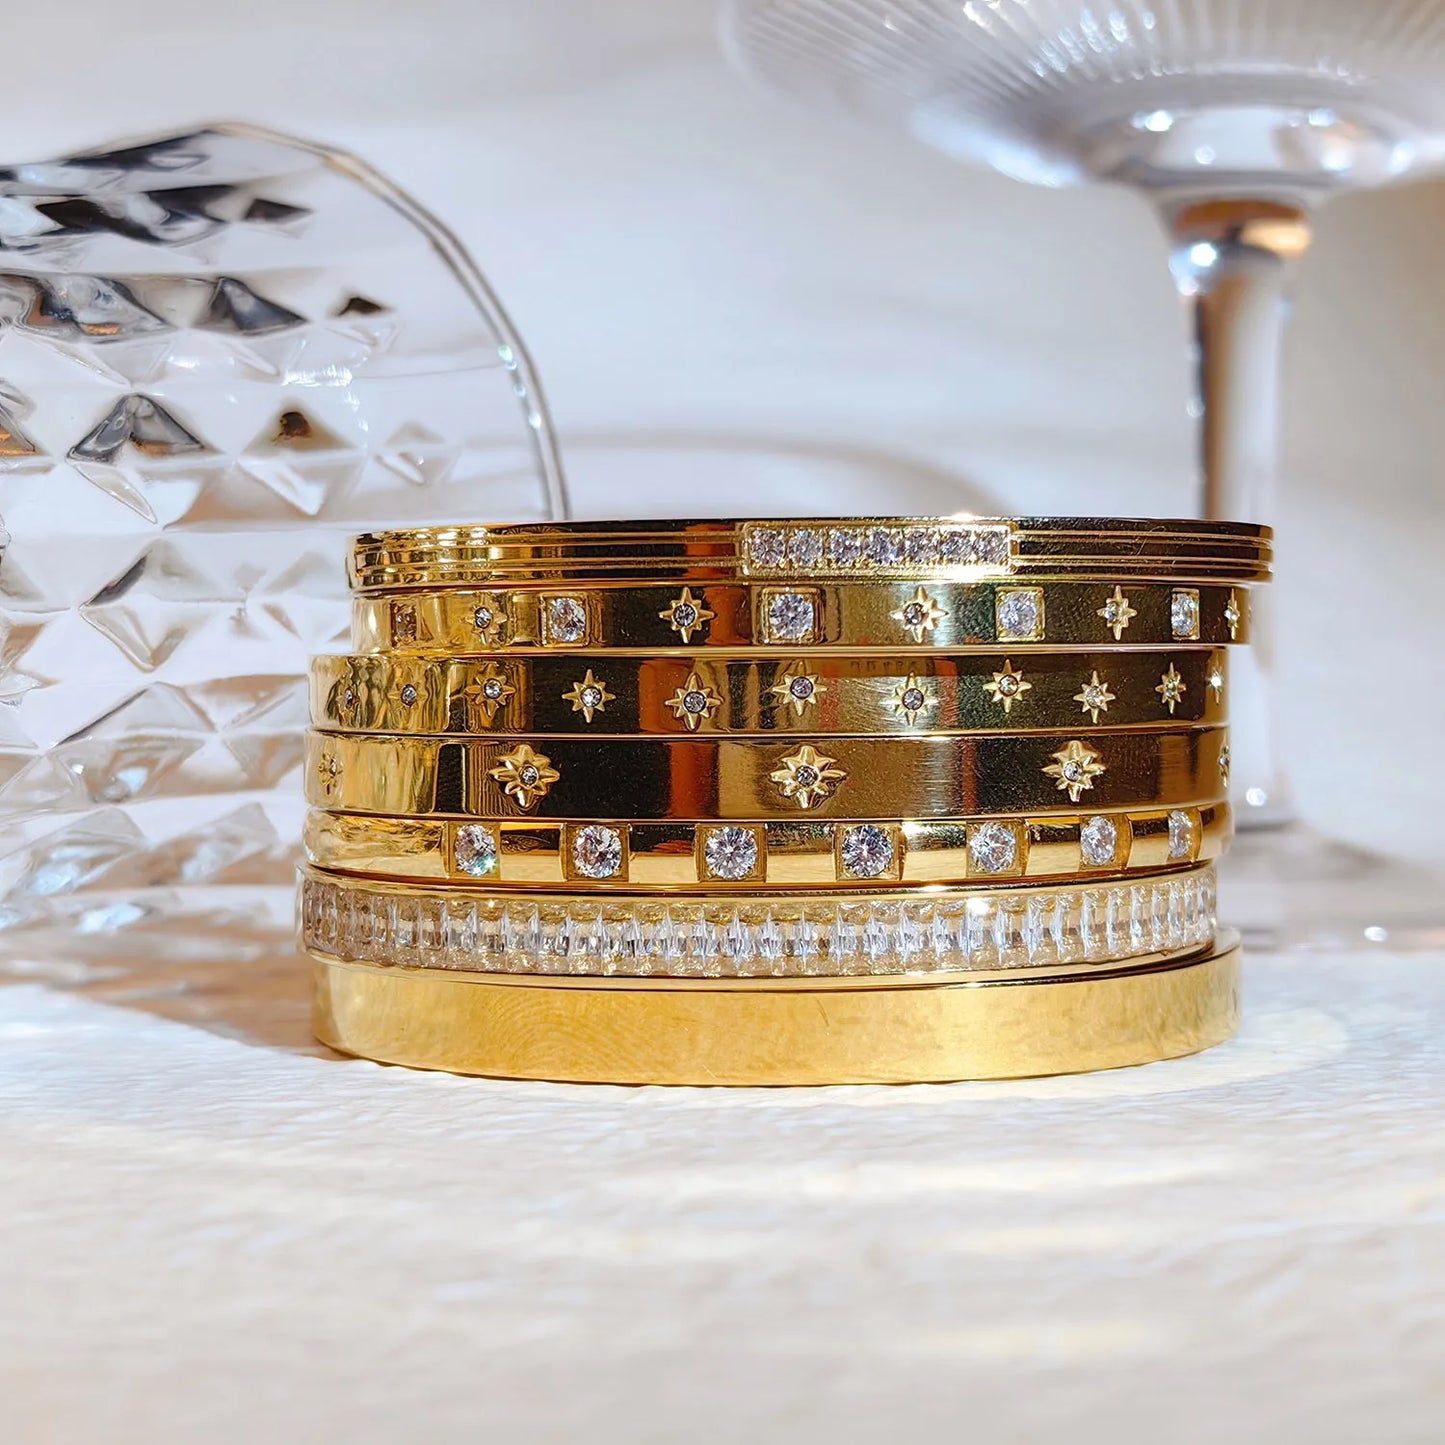 stainless steel bracelets with waterproof cubic zirconia bangles, ensuring tarnish-free jewelry for women.